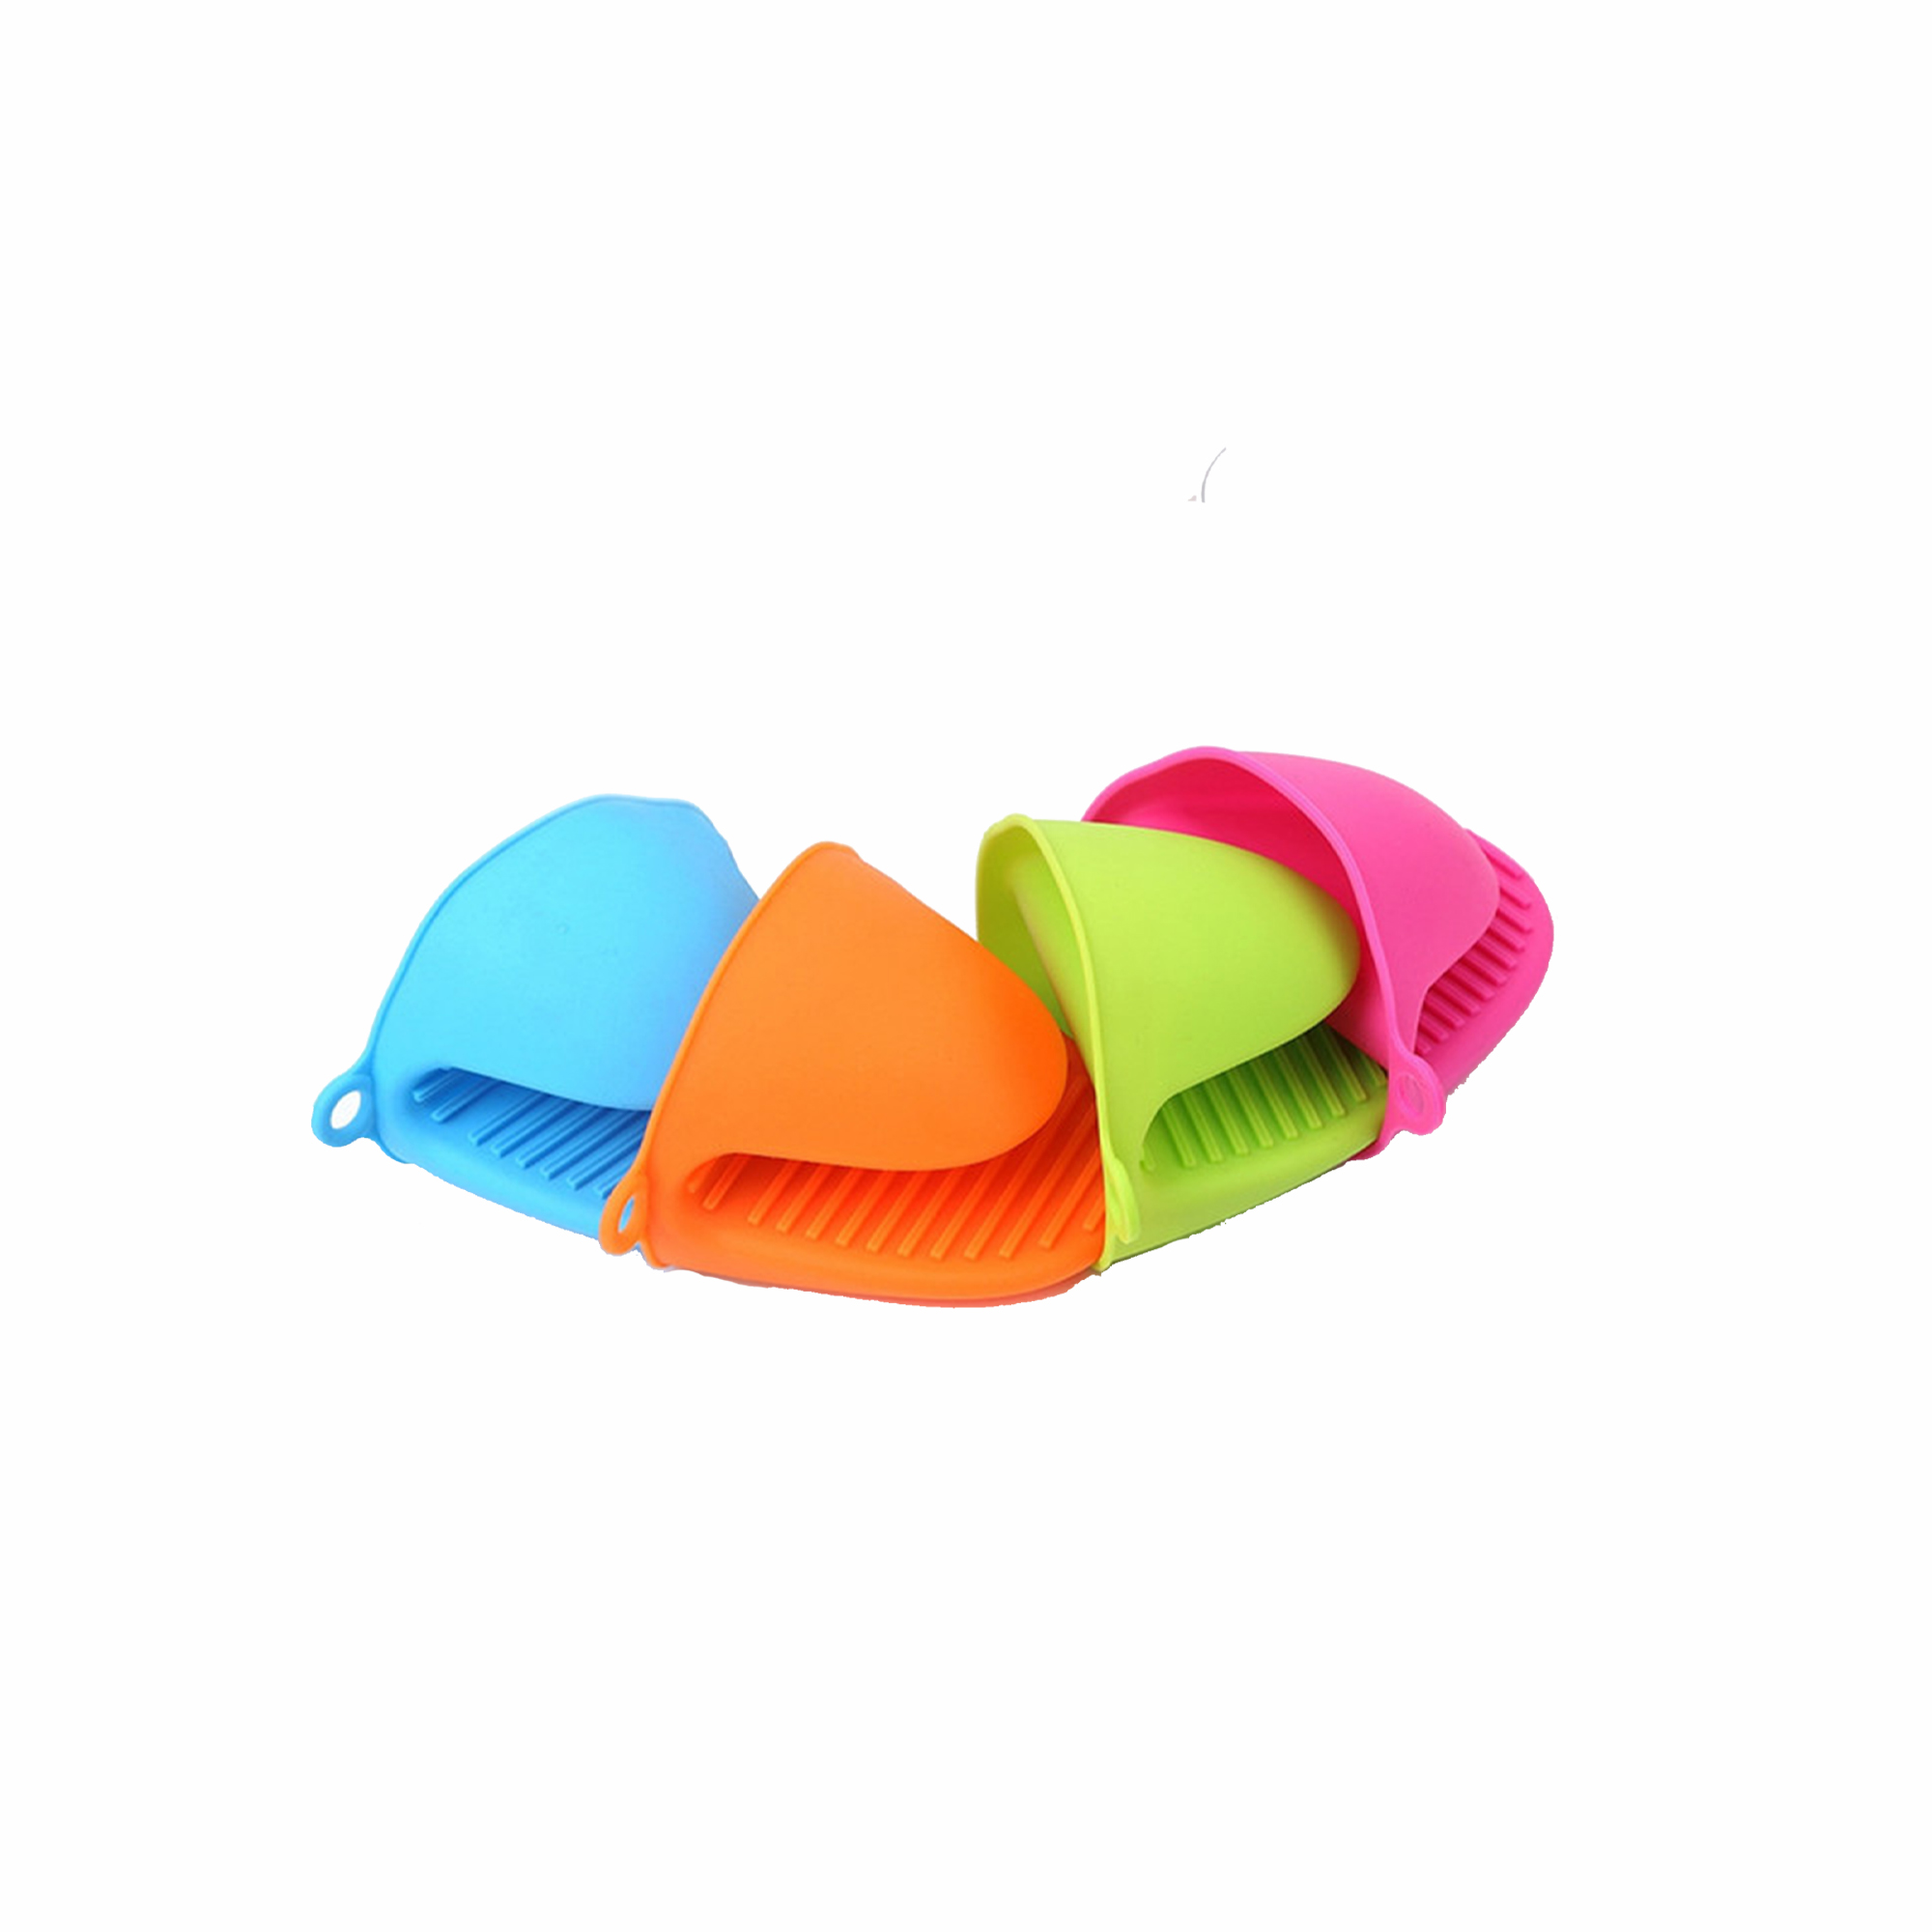 Heat-Resistant Silicone Pot Holder and Oven Mitt Grip Claw- 4pcs